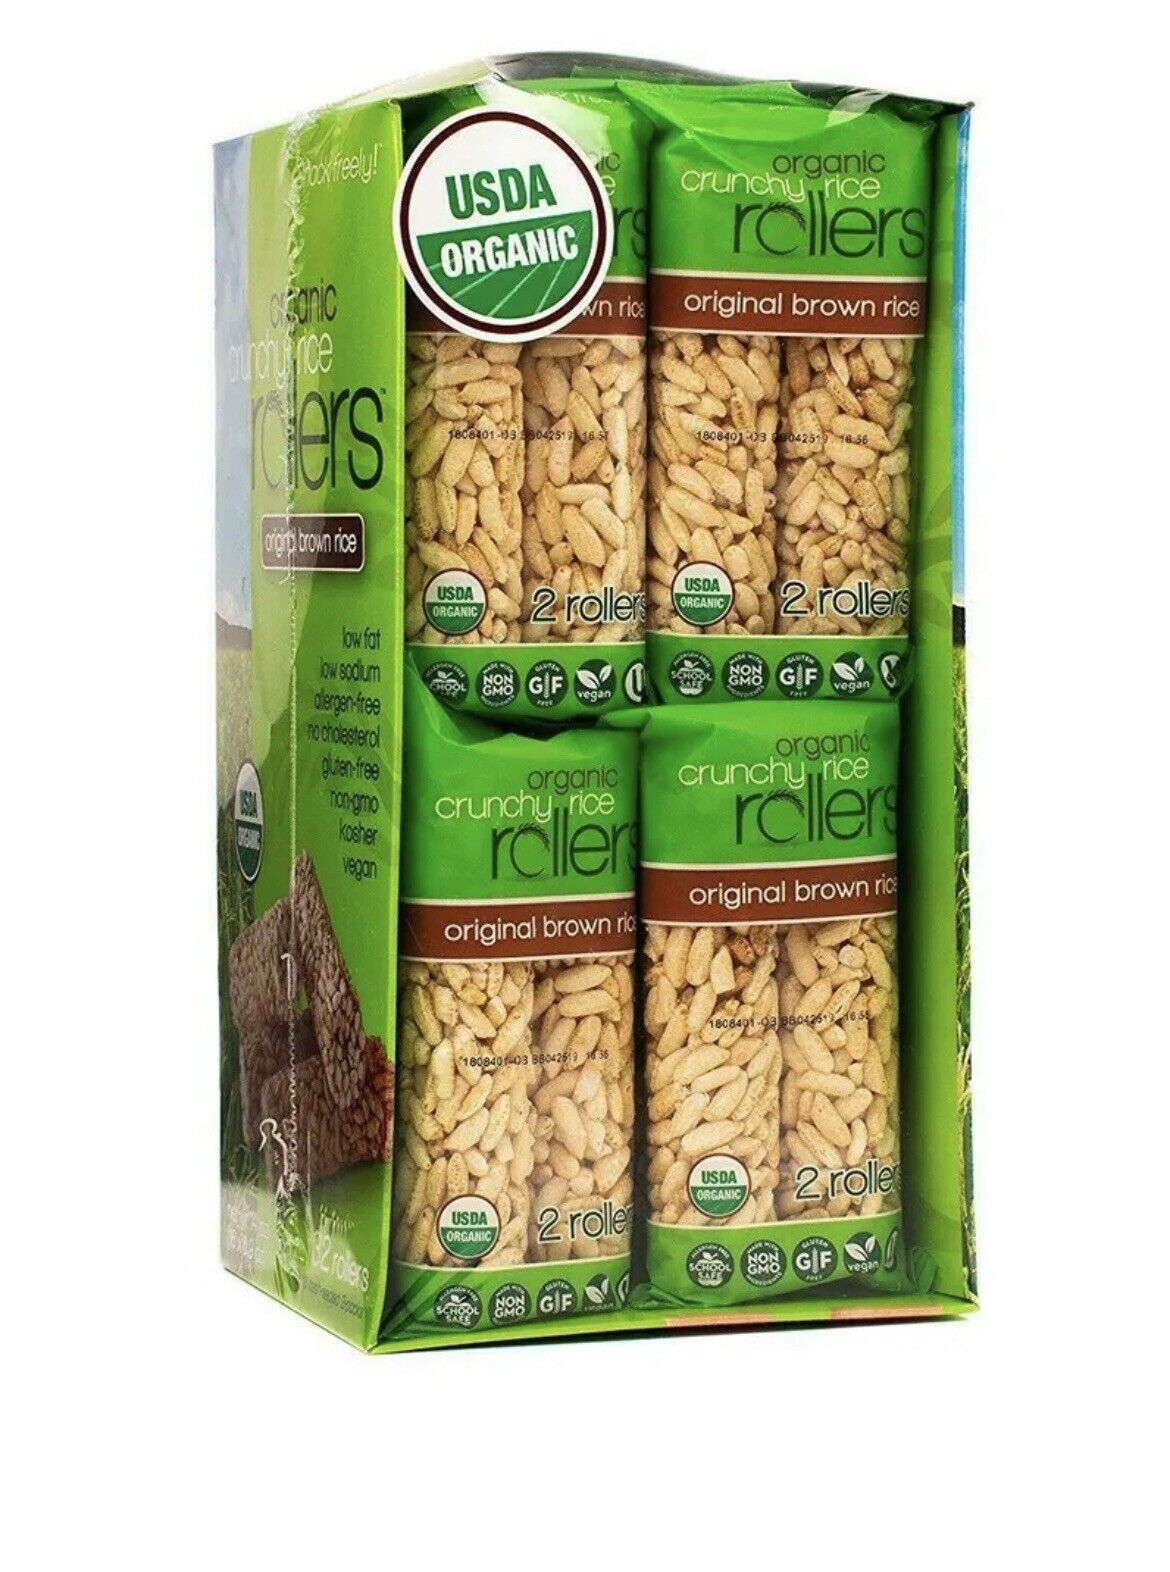 🔥 Bamboo Lane Organic Rice 32 Rollers, 14 Ounce Basic Pack 🔥